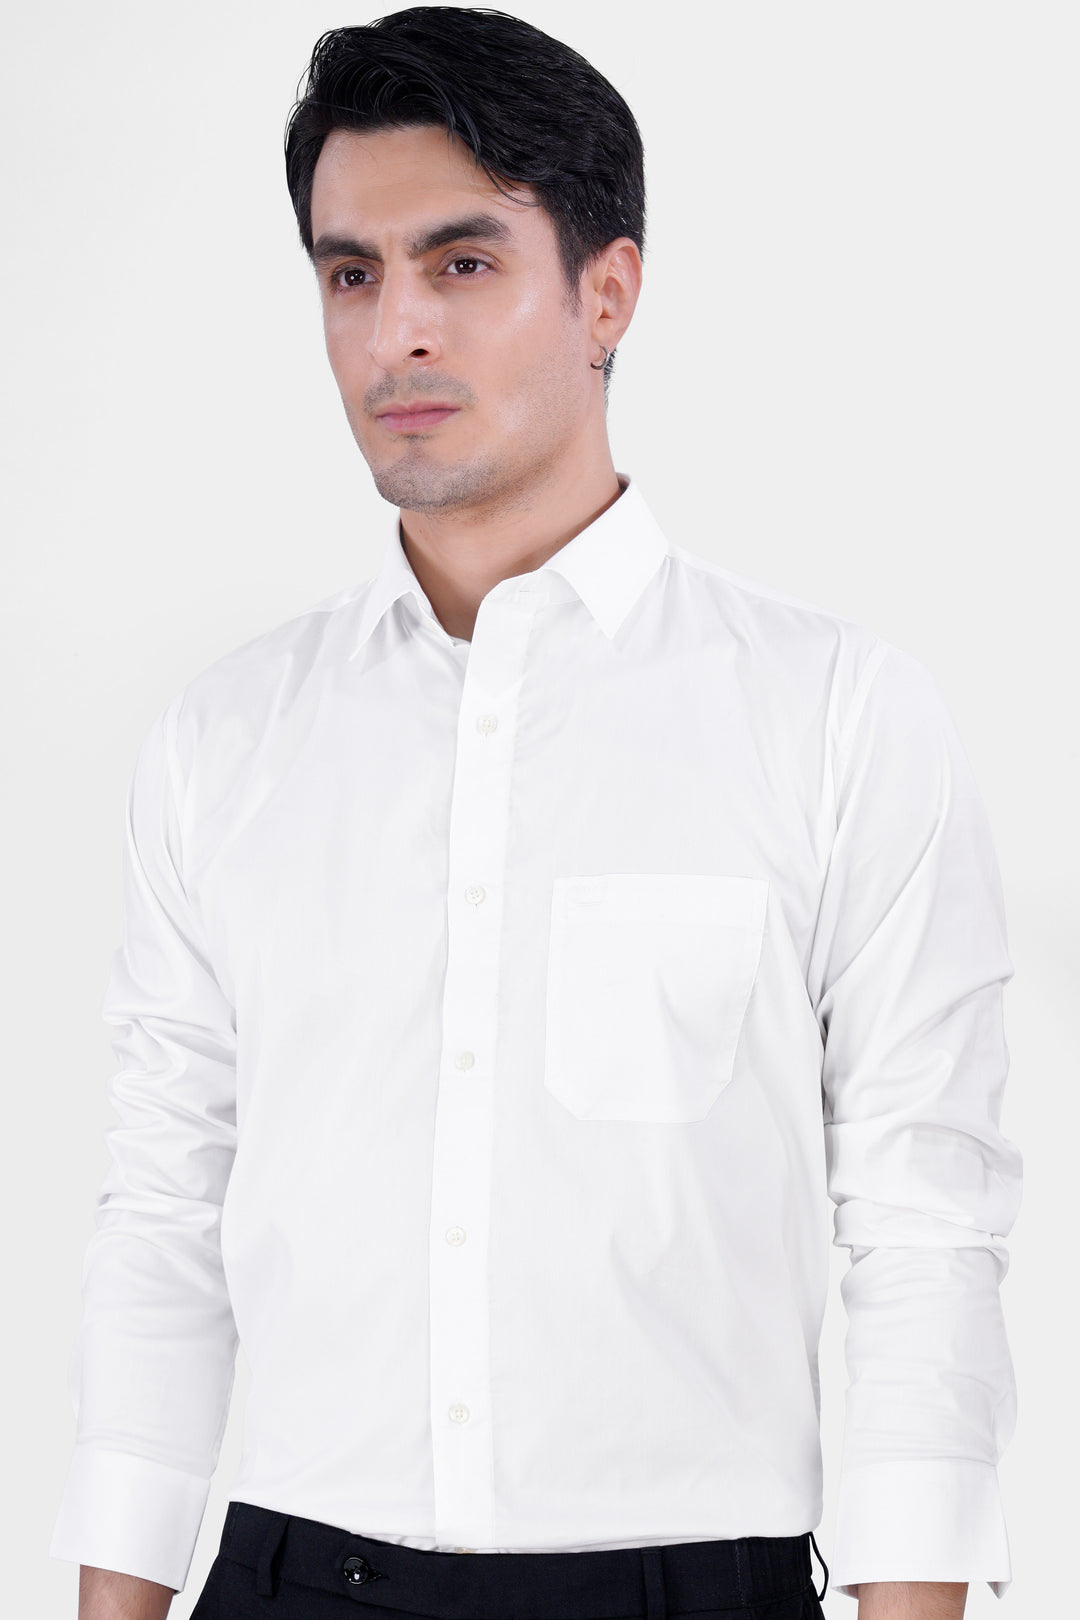 white shirt brown pants - Online Exclusive Rate- OFF 75%